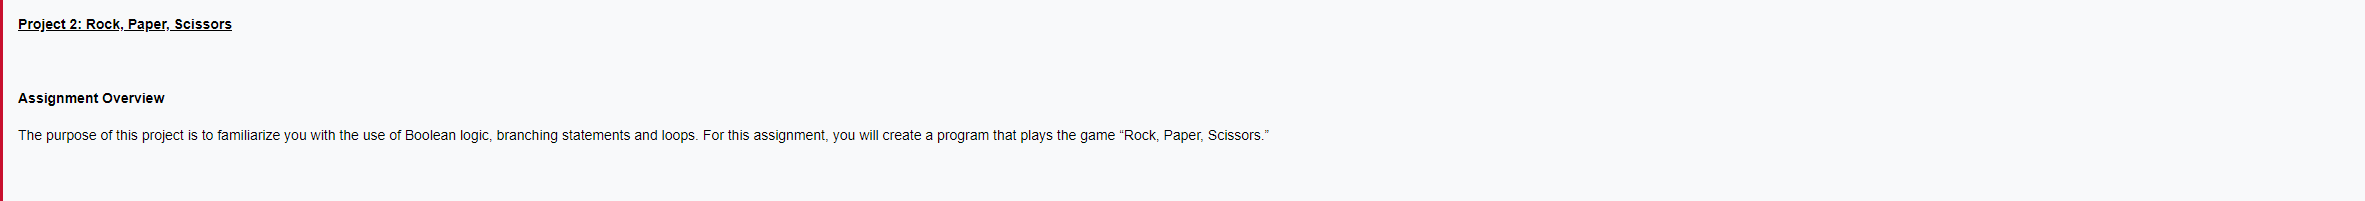 Solved Project 2: Rock, Paper, Scissors Assignment Overview | Chegg.com